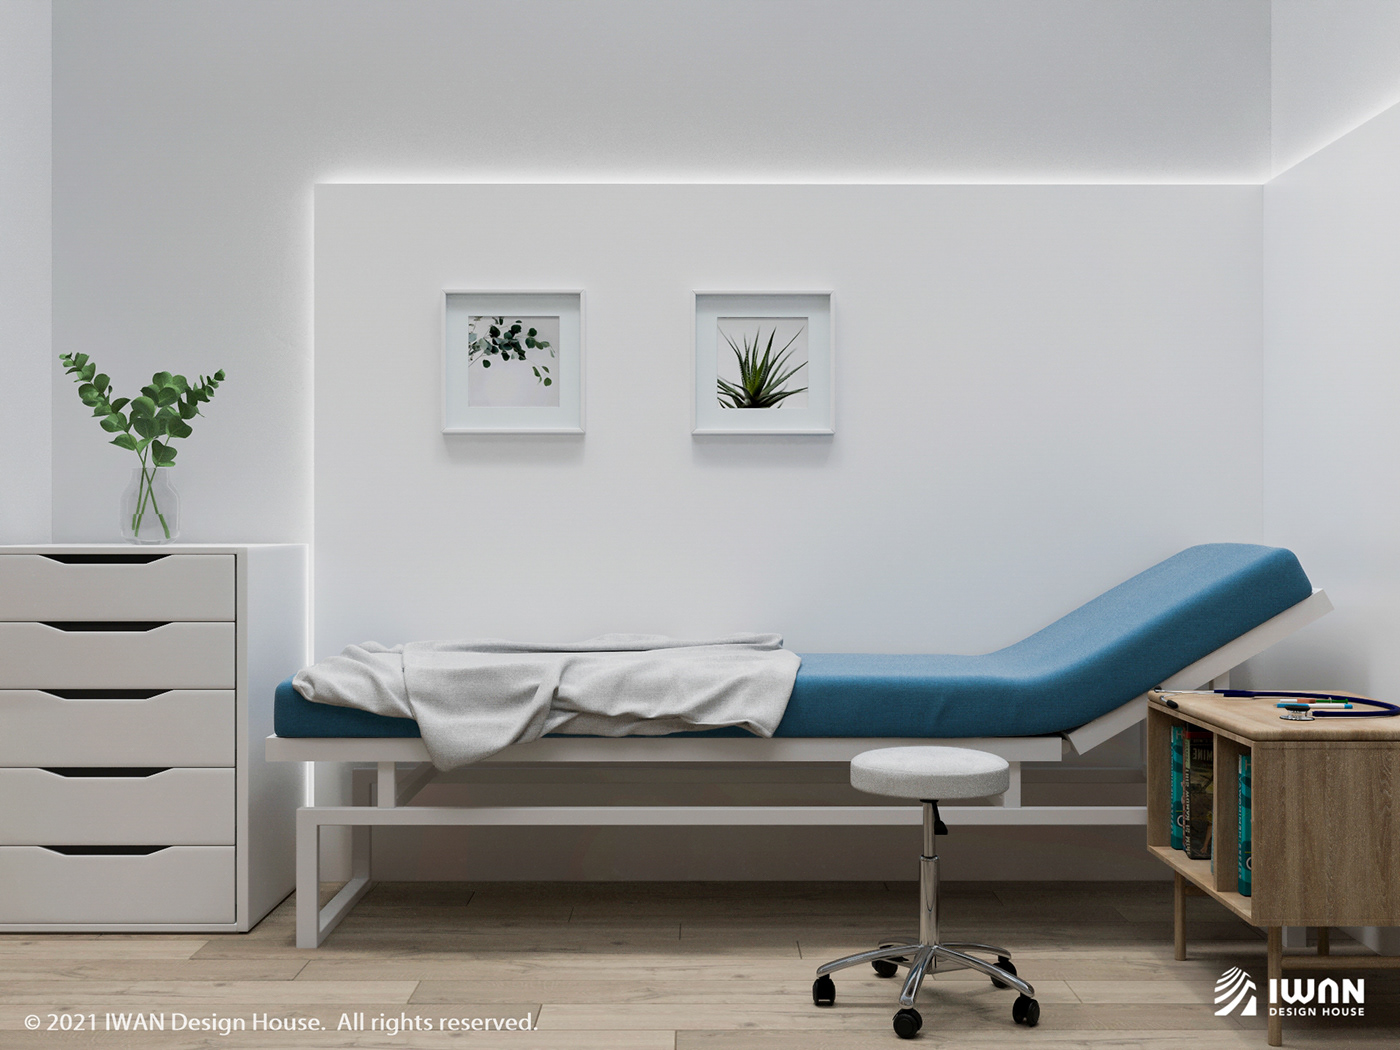 Interior design for clinic with modern style - Examination room